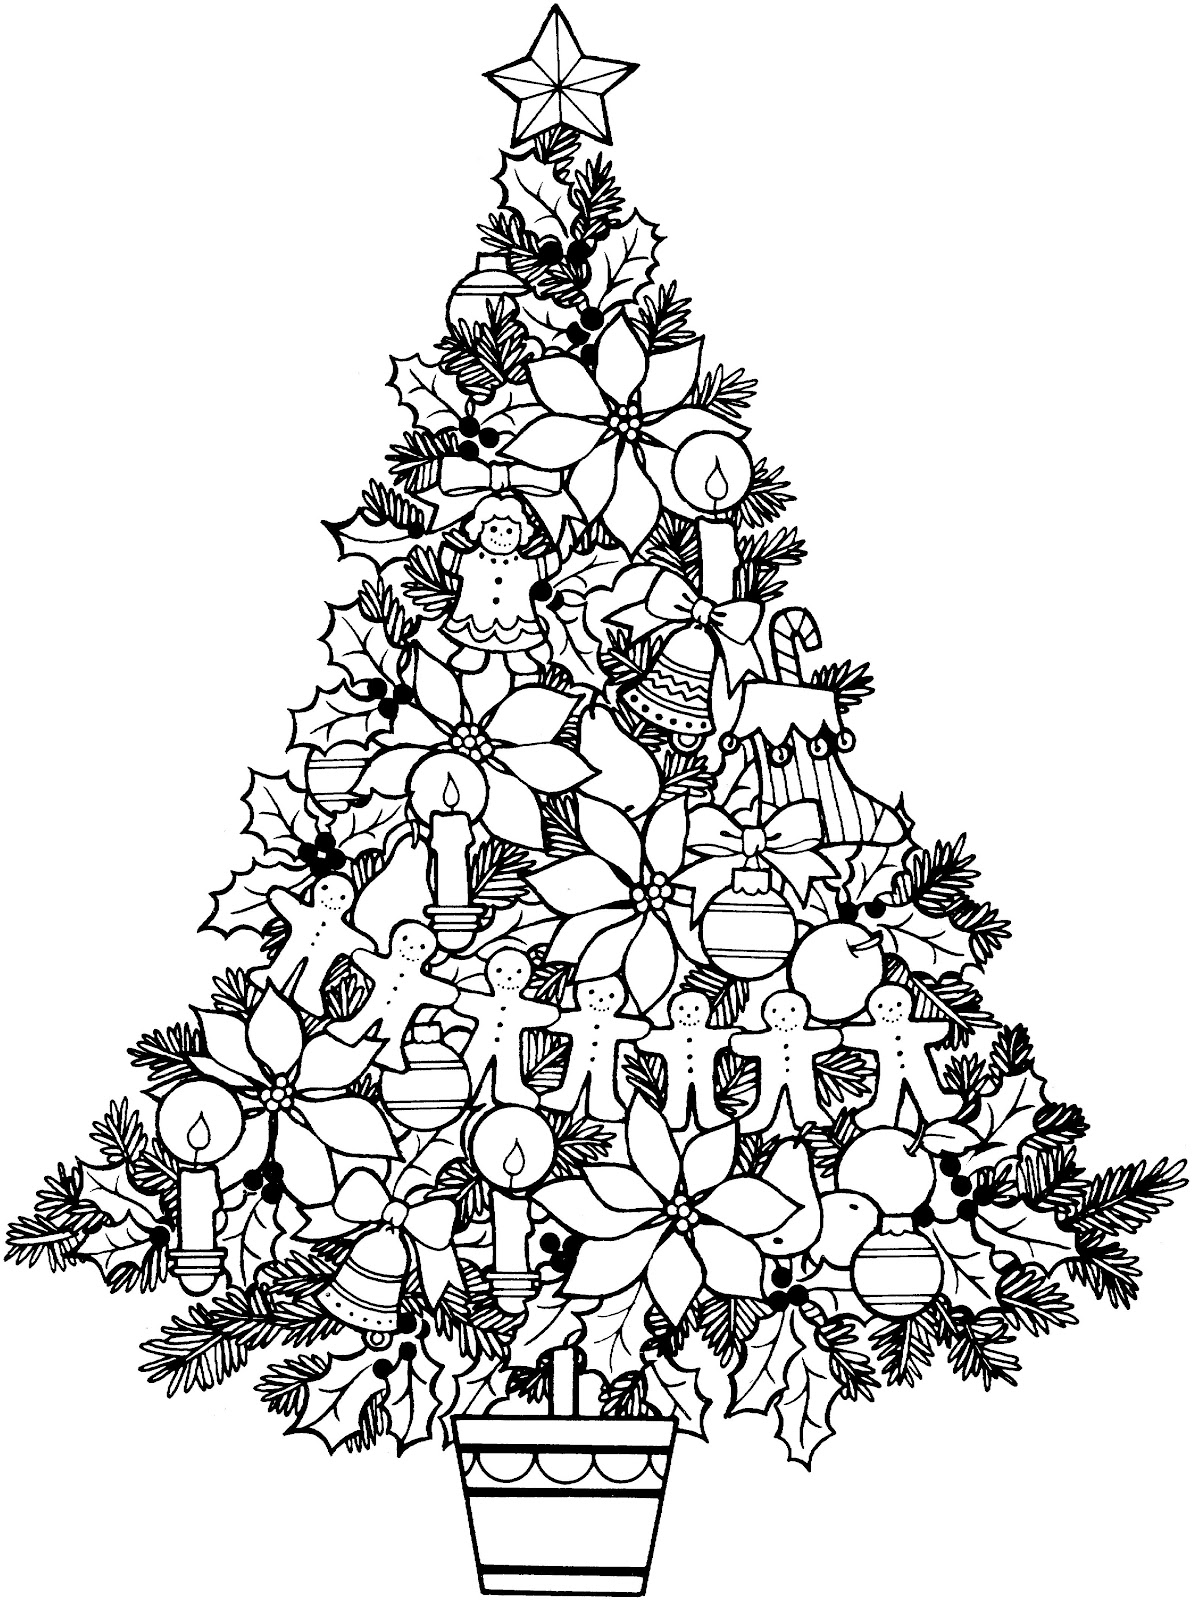 Christmas Black And White   Free Cliparts That You Can Download To